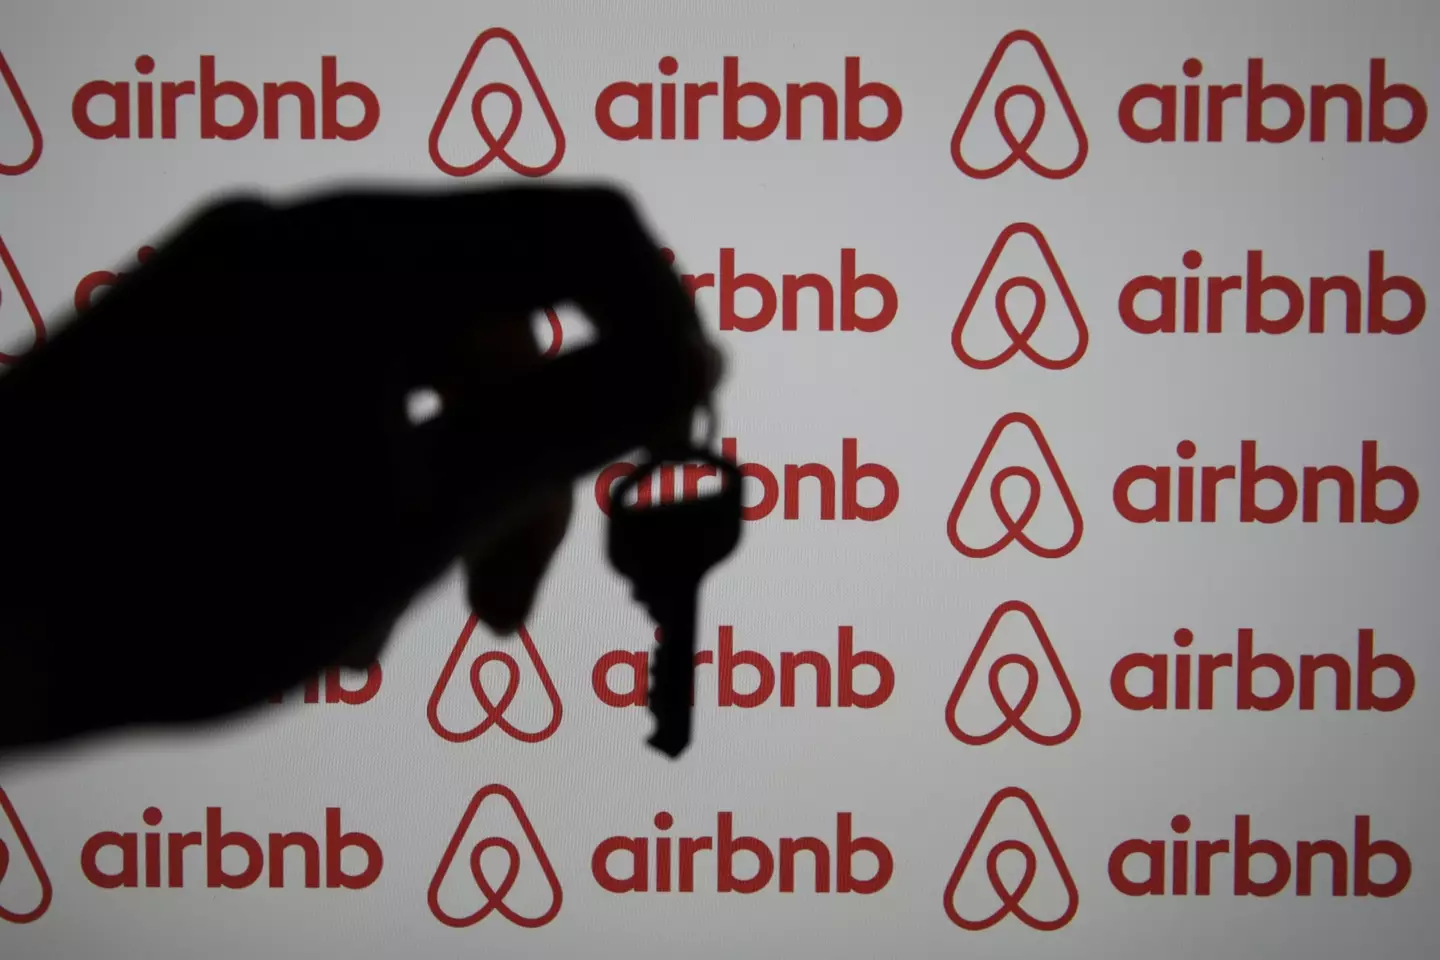 Airbnb first instated its party ban in 2020.